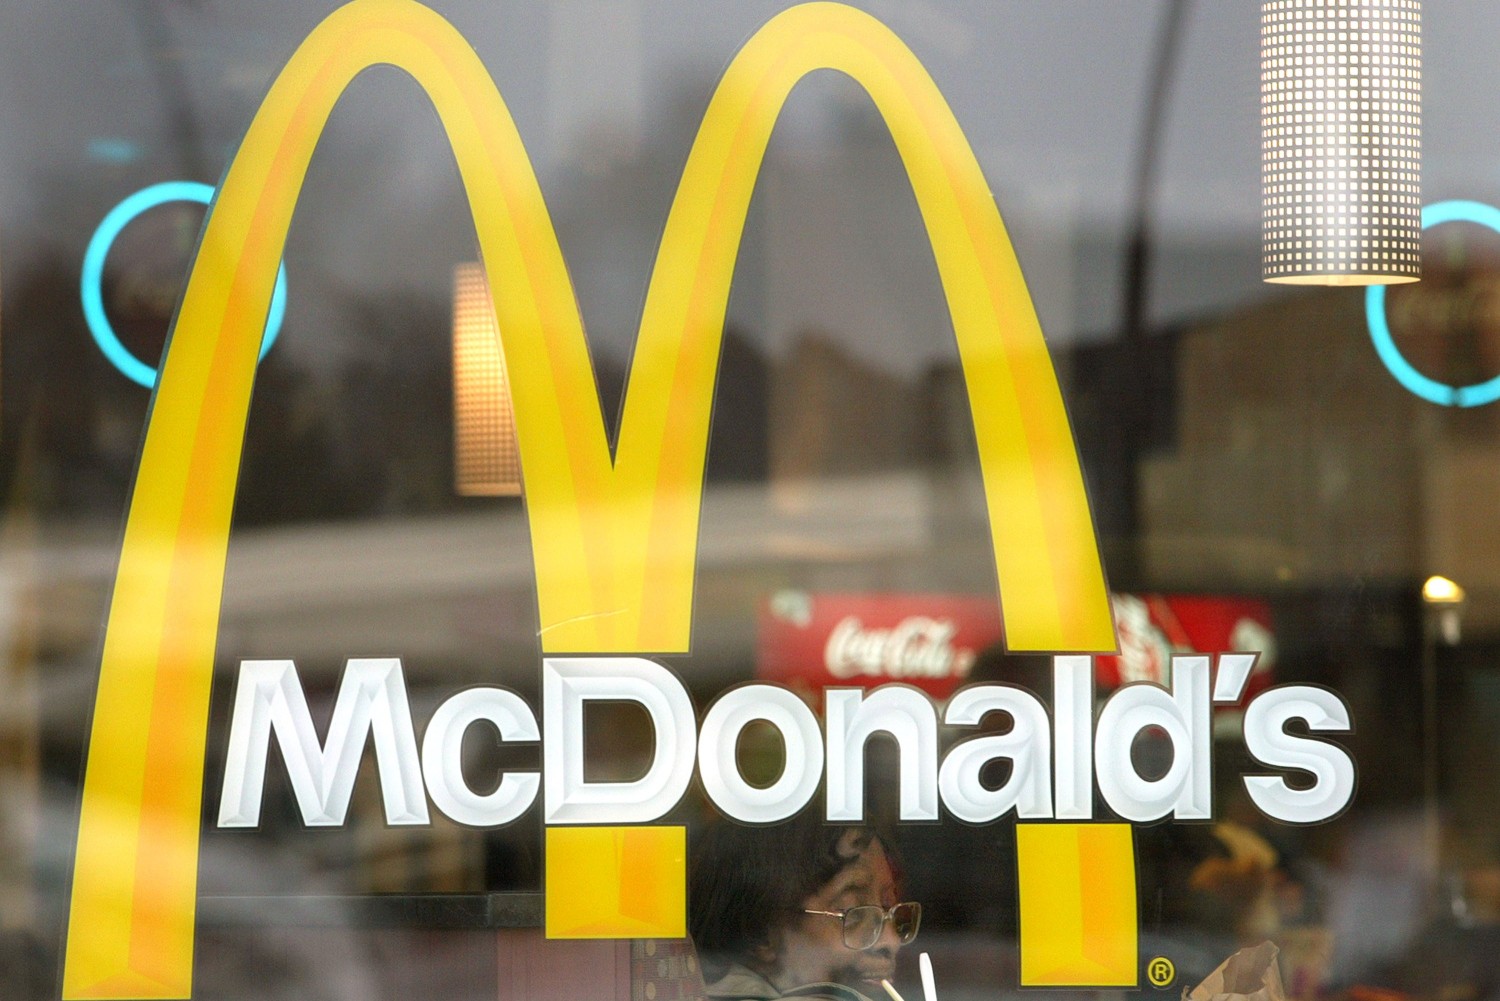 McDonald’s is now banning customers from watching PORN in its restaurants